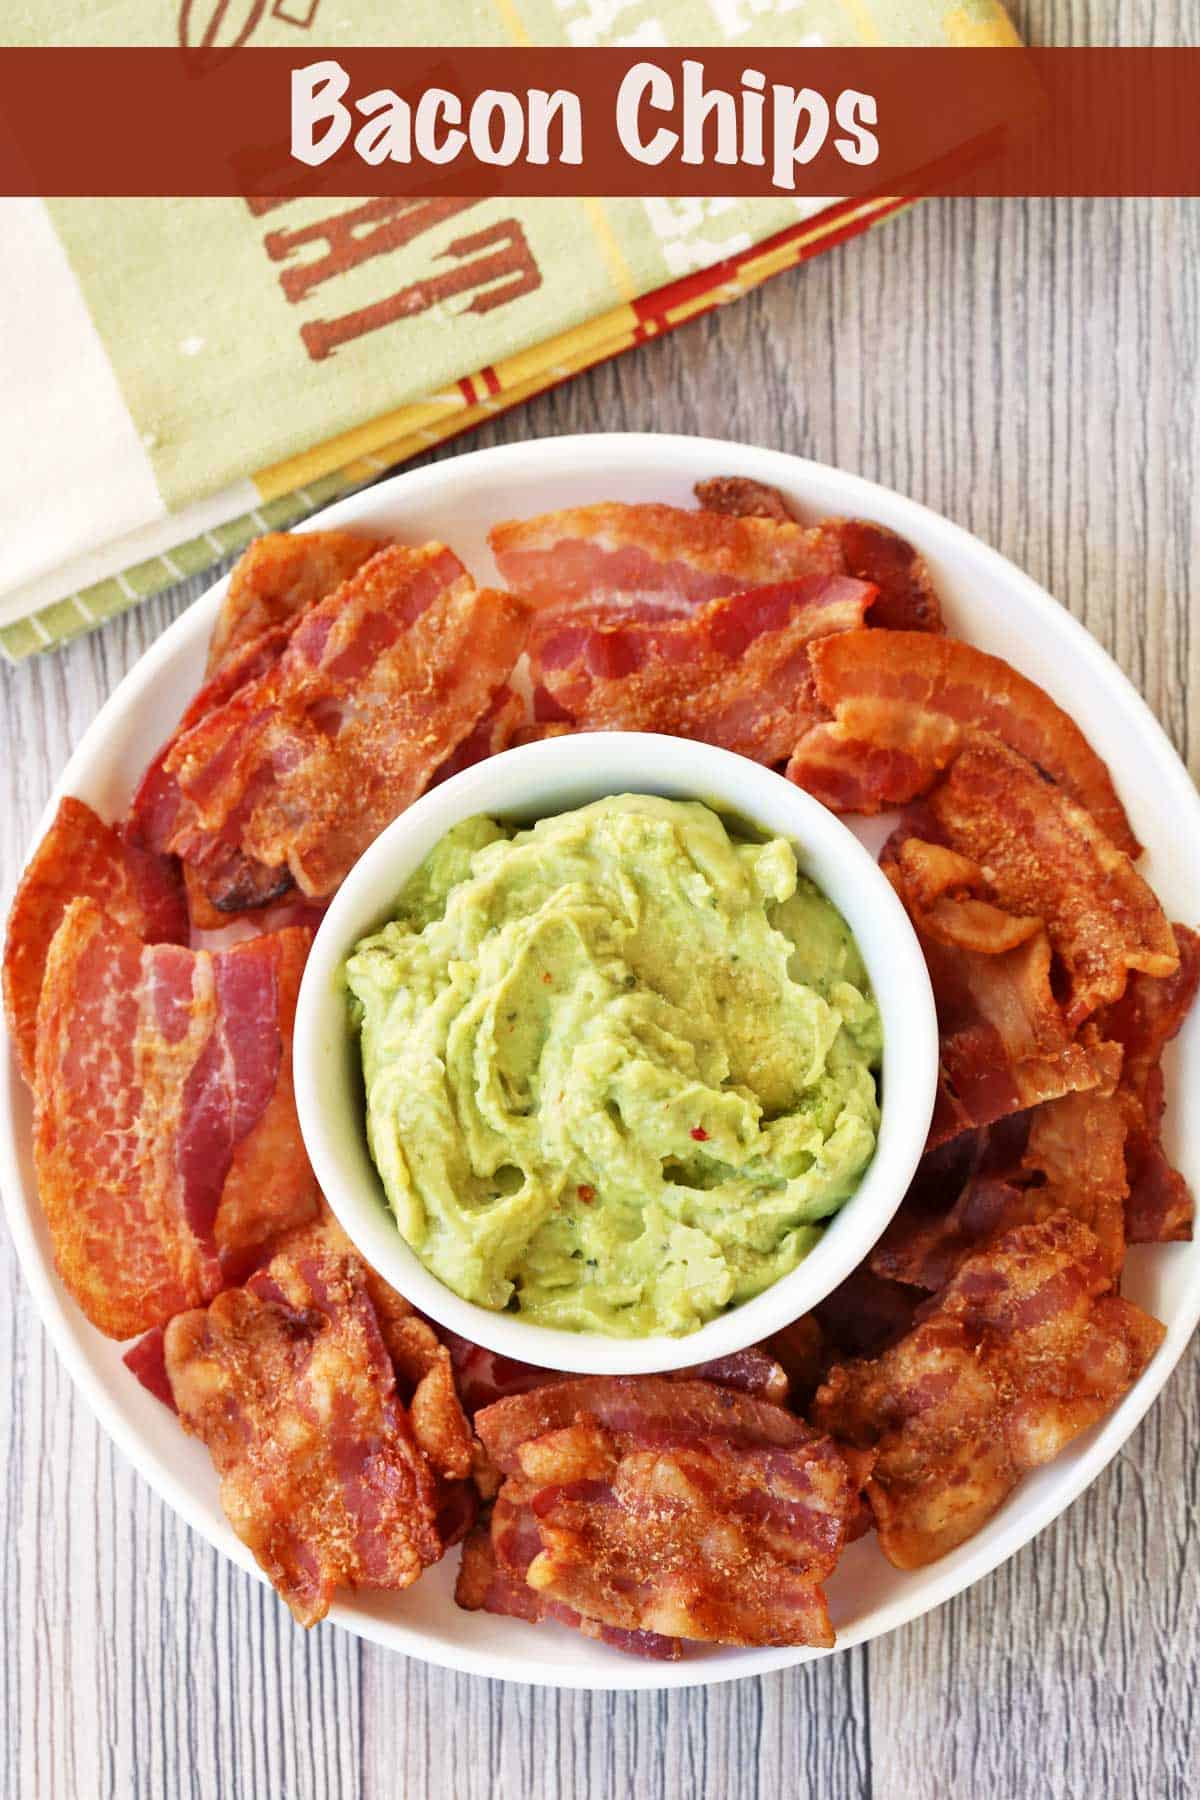 Bacon chips served on a plate with a bowl of guacamole.